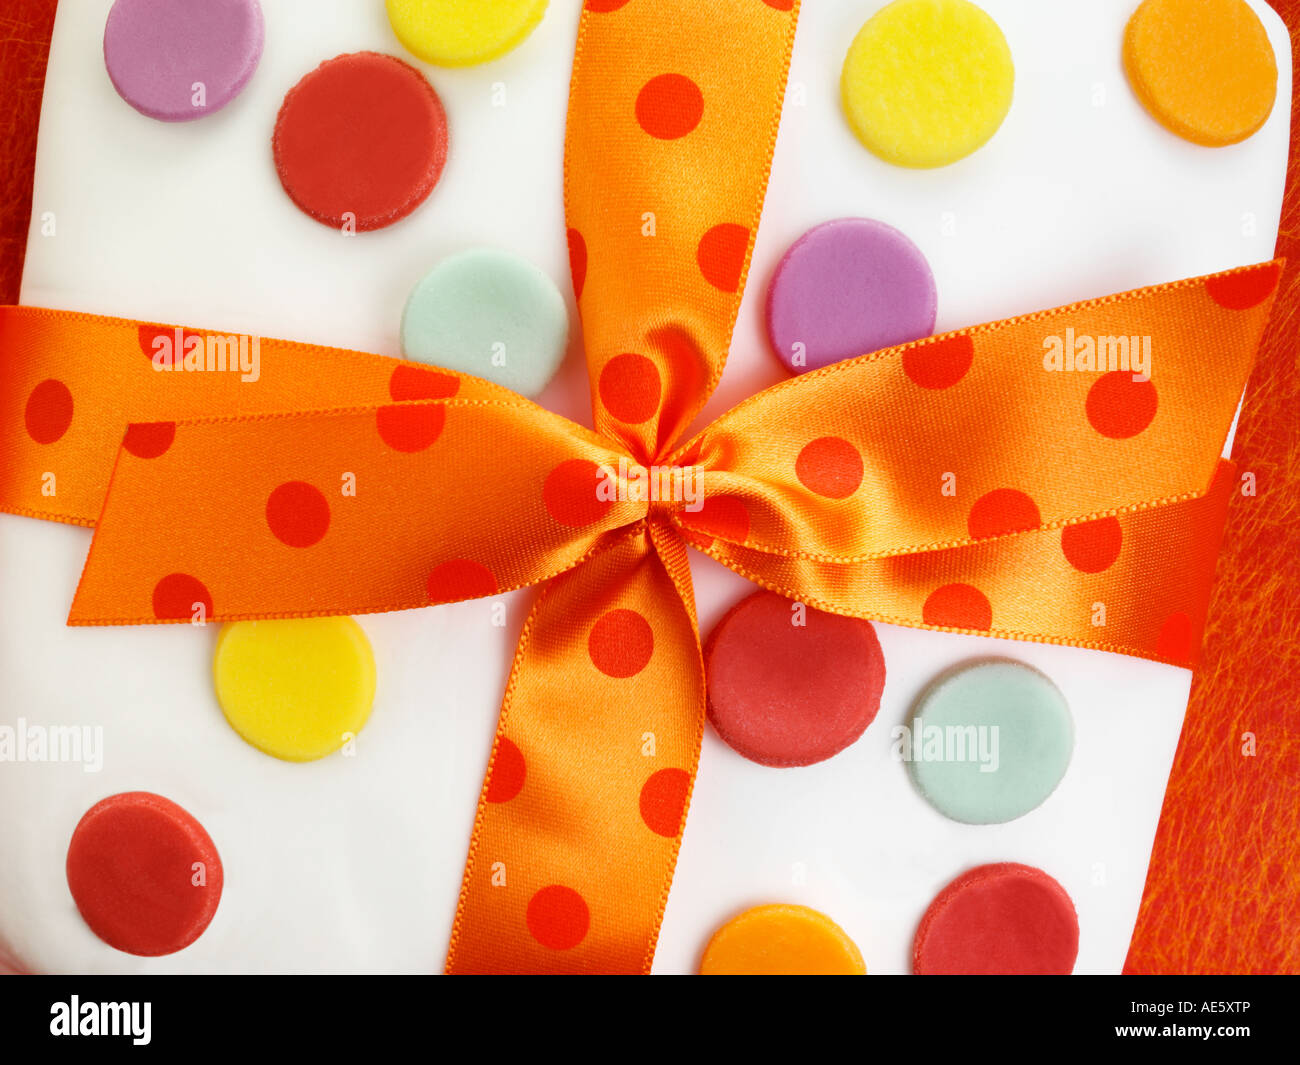 PARTY CAKE WITH POLKA DOTS Stock Photo